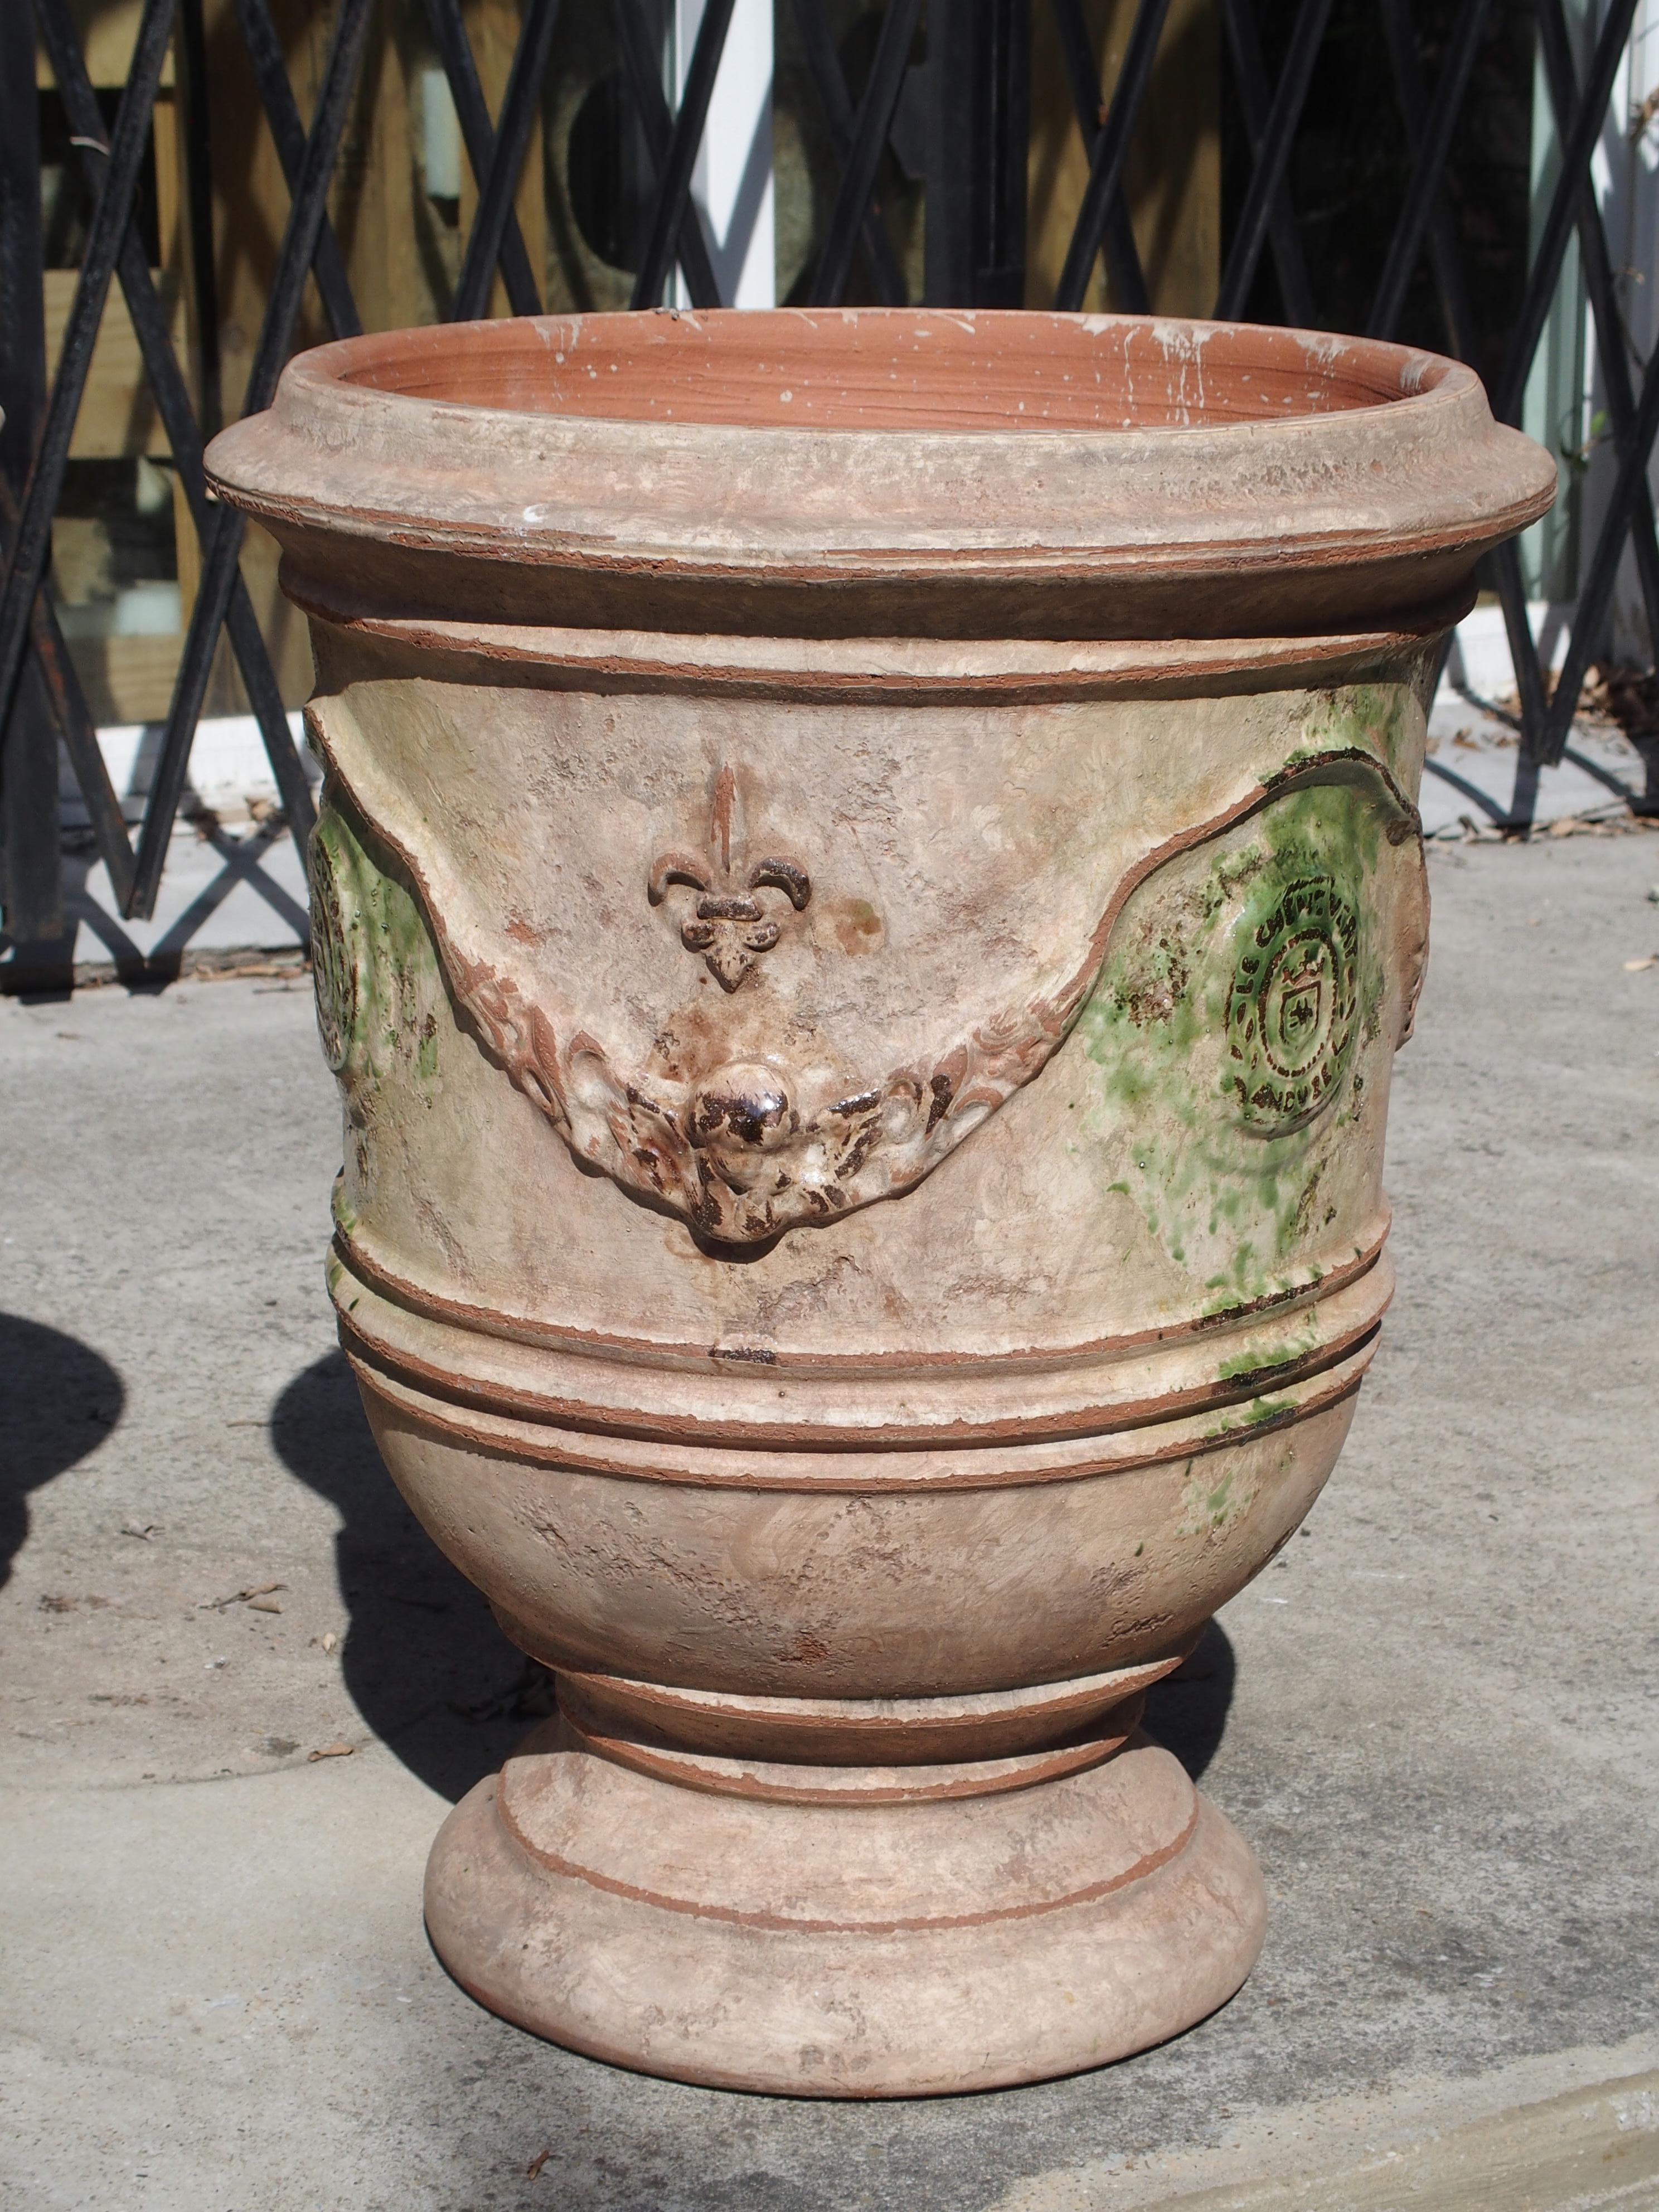 From Anduze, France, these wonderful, painted terra cotta planters bring a classic South of France feel to any area, indoors or out. They have been produced since the early 1700s in varying designs and coloration and originally, were intended to